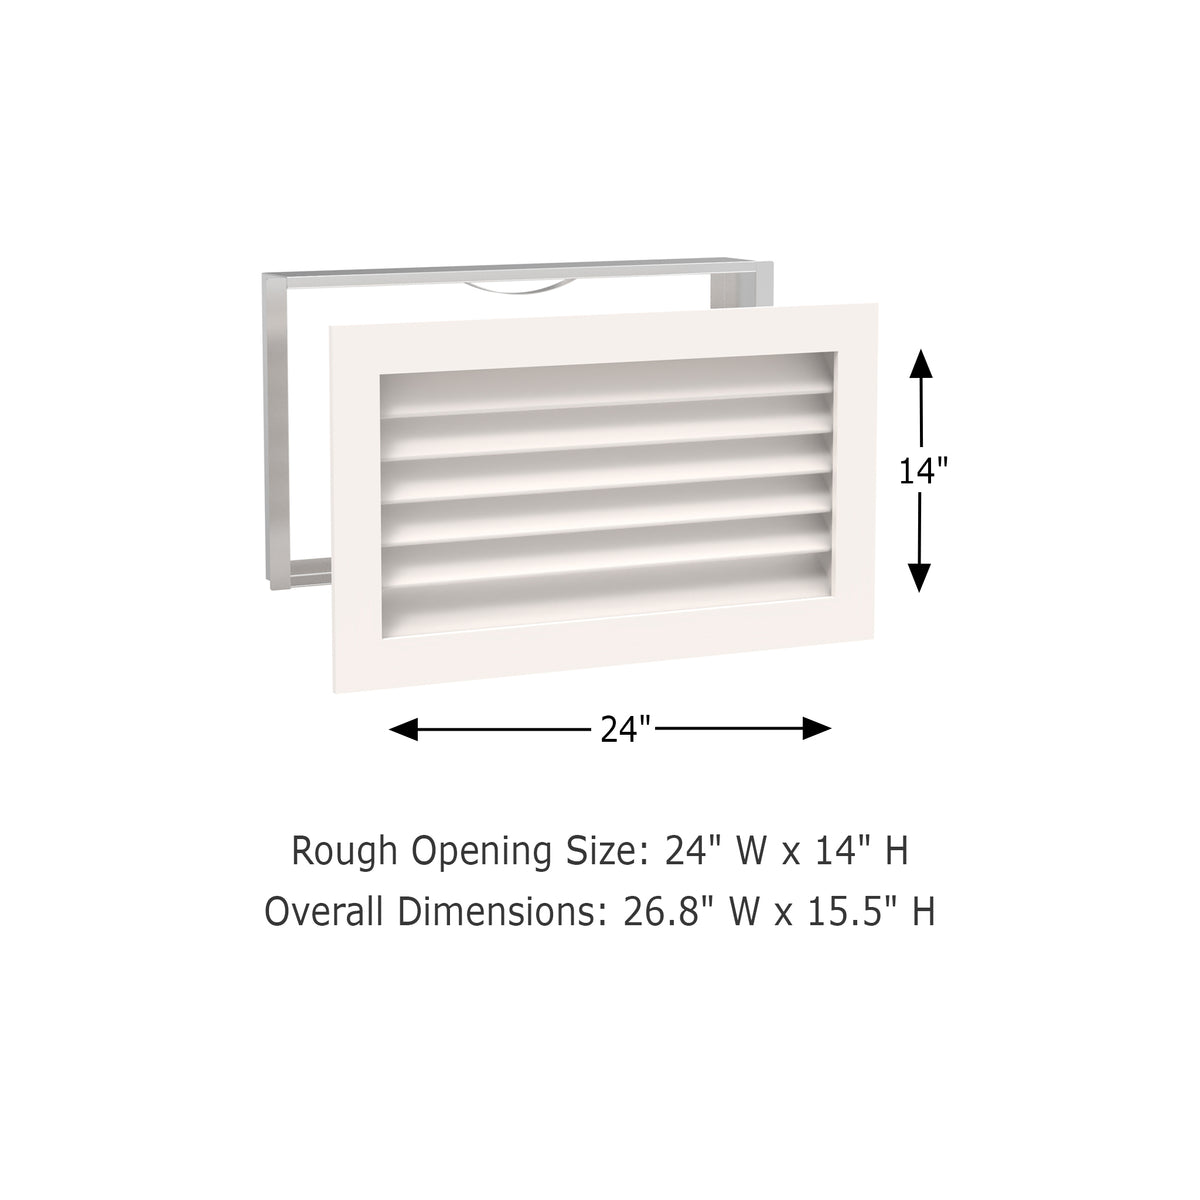 Worth Home Products - decorative wood AC vent covers luxury return vent - Primed Wood Louvers 24x14